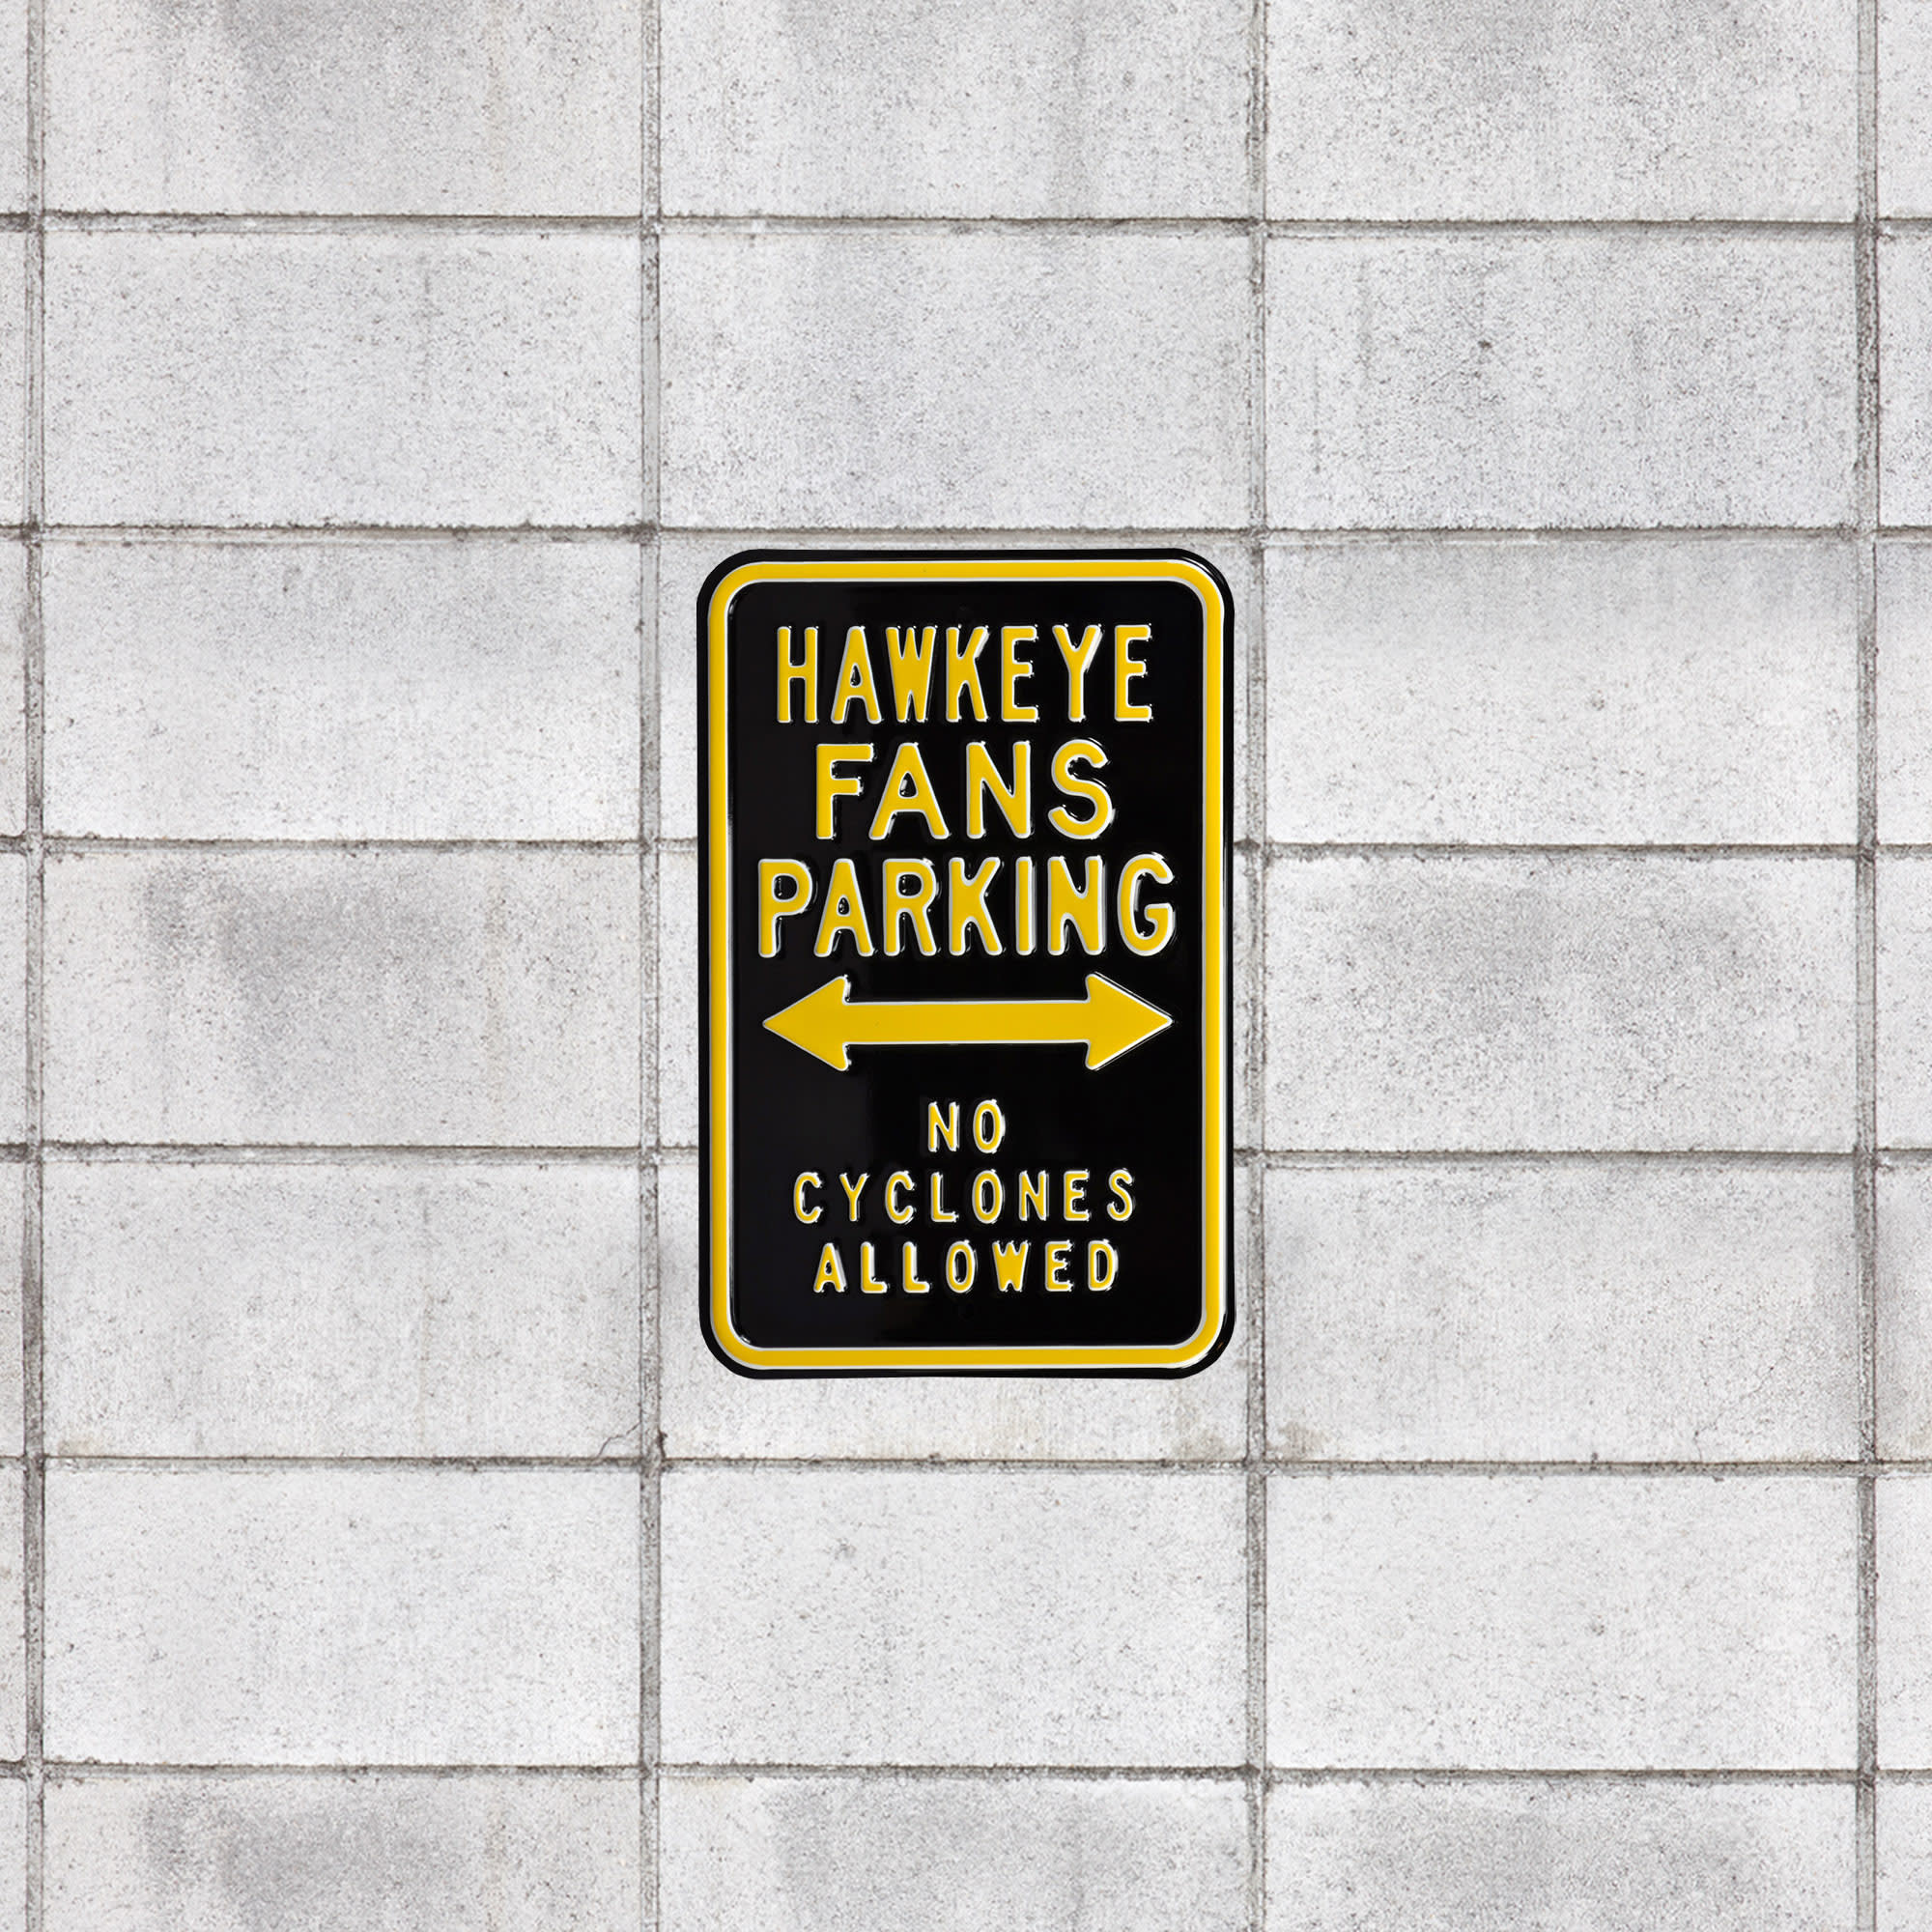 Iowa Hawkeyes: No Cyclones Allowed Parking - Officially Licensed Metal Street Sign 18.0"W x 12.0"H by Fathead | 100% Steel